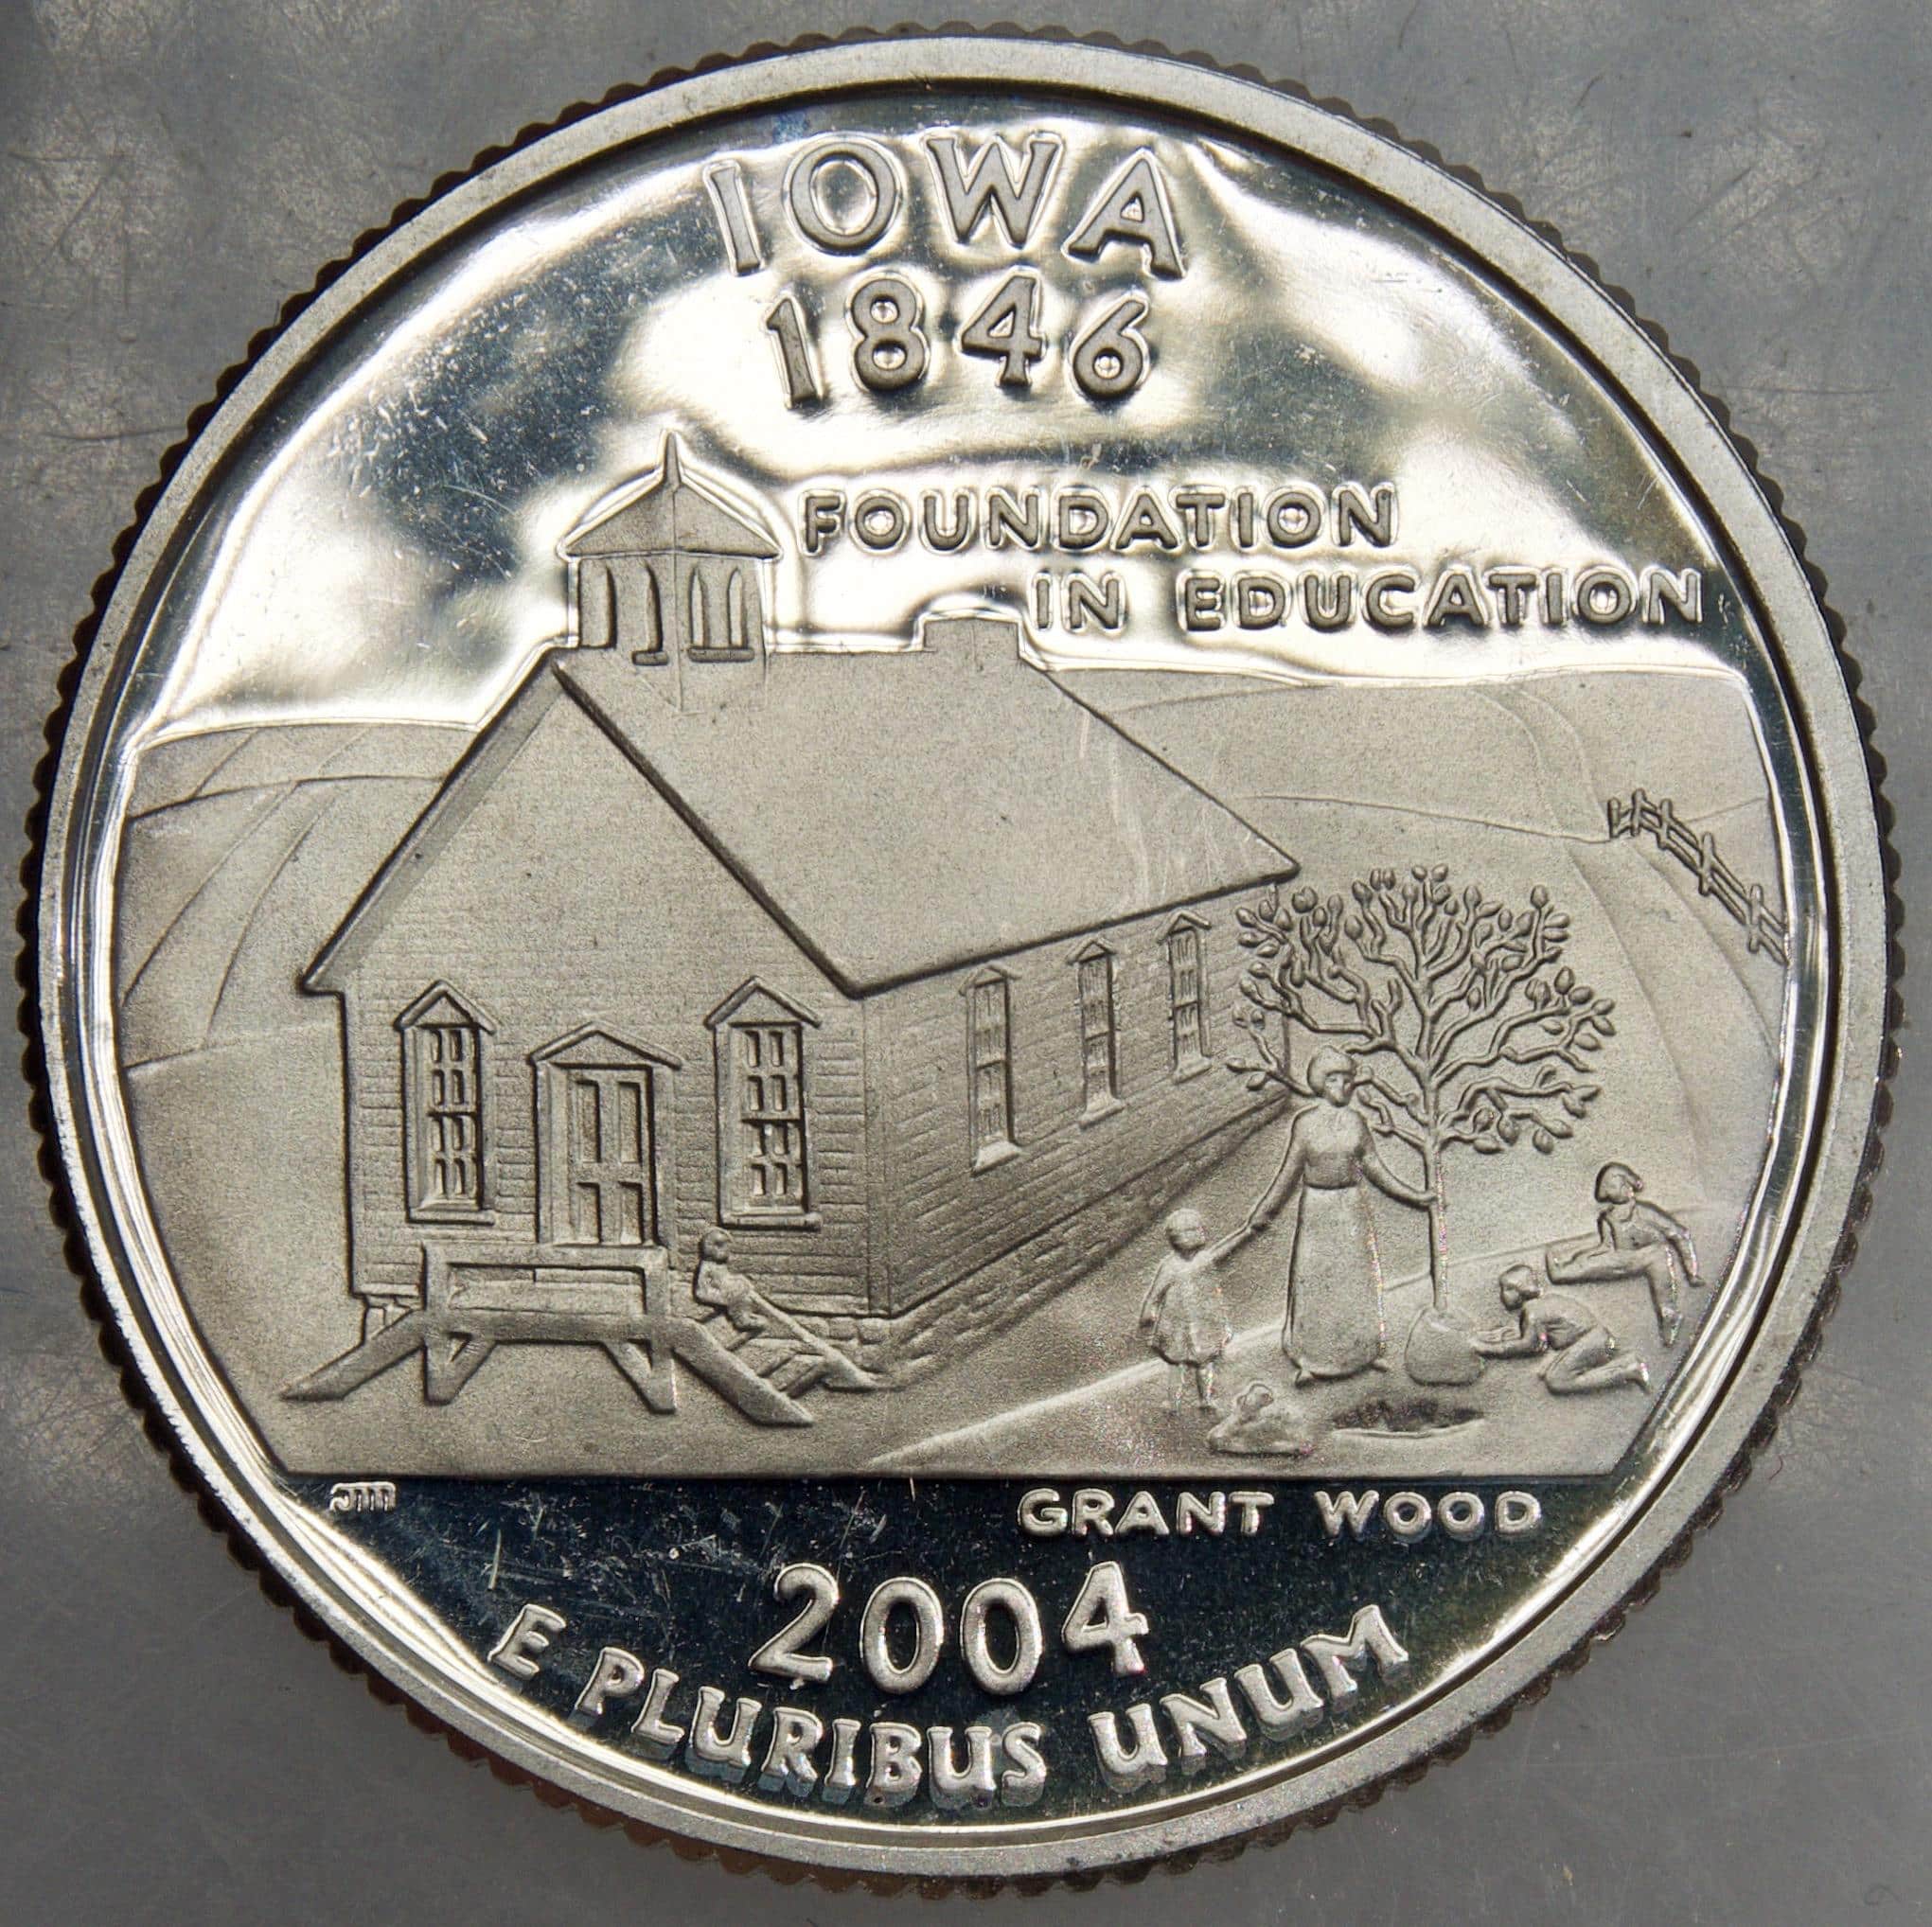 2004 S Iowa Quarters#2 Silver Proof Light abrasion as shown.